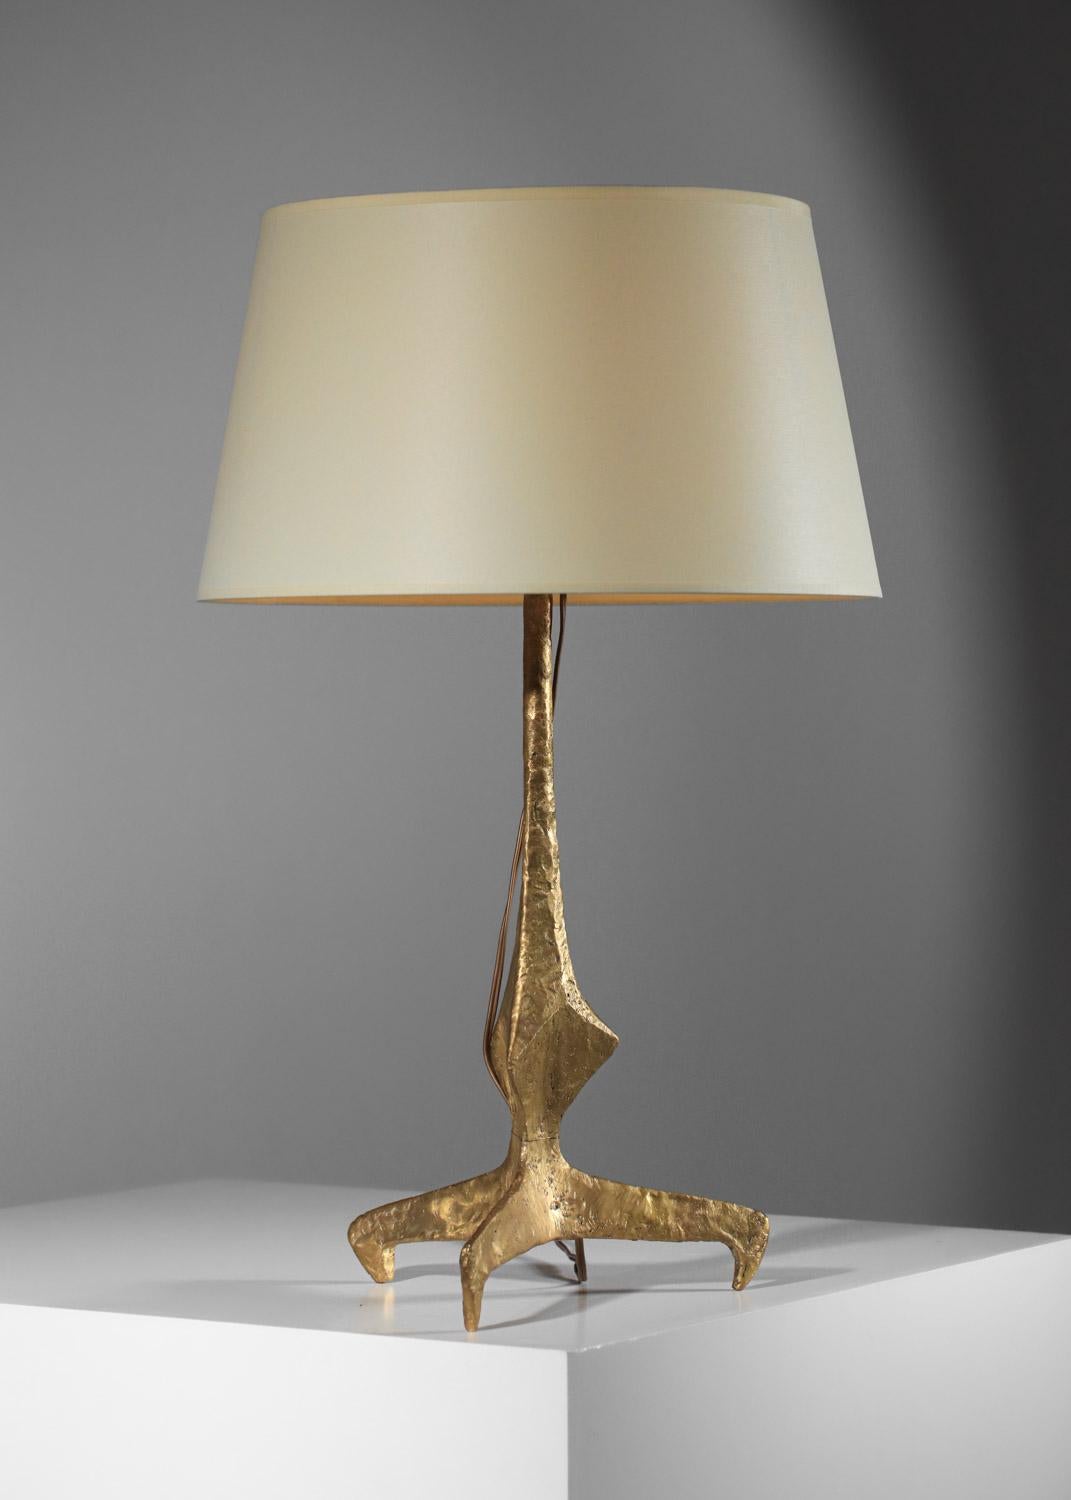 French Gilt bronze table lamp in the Felix Agostini style, tripod-shaped  For Sale